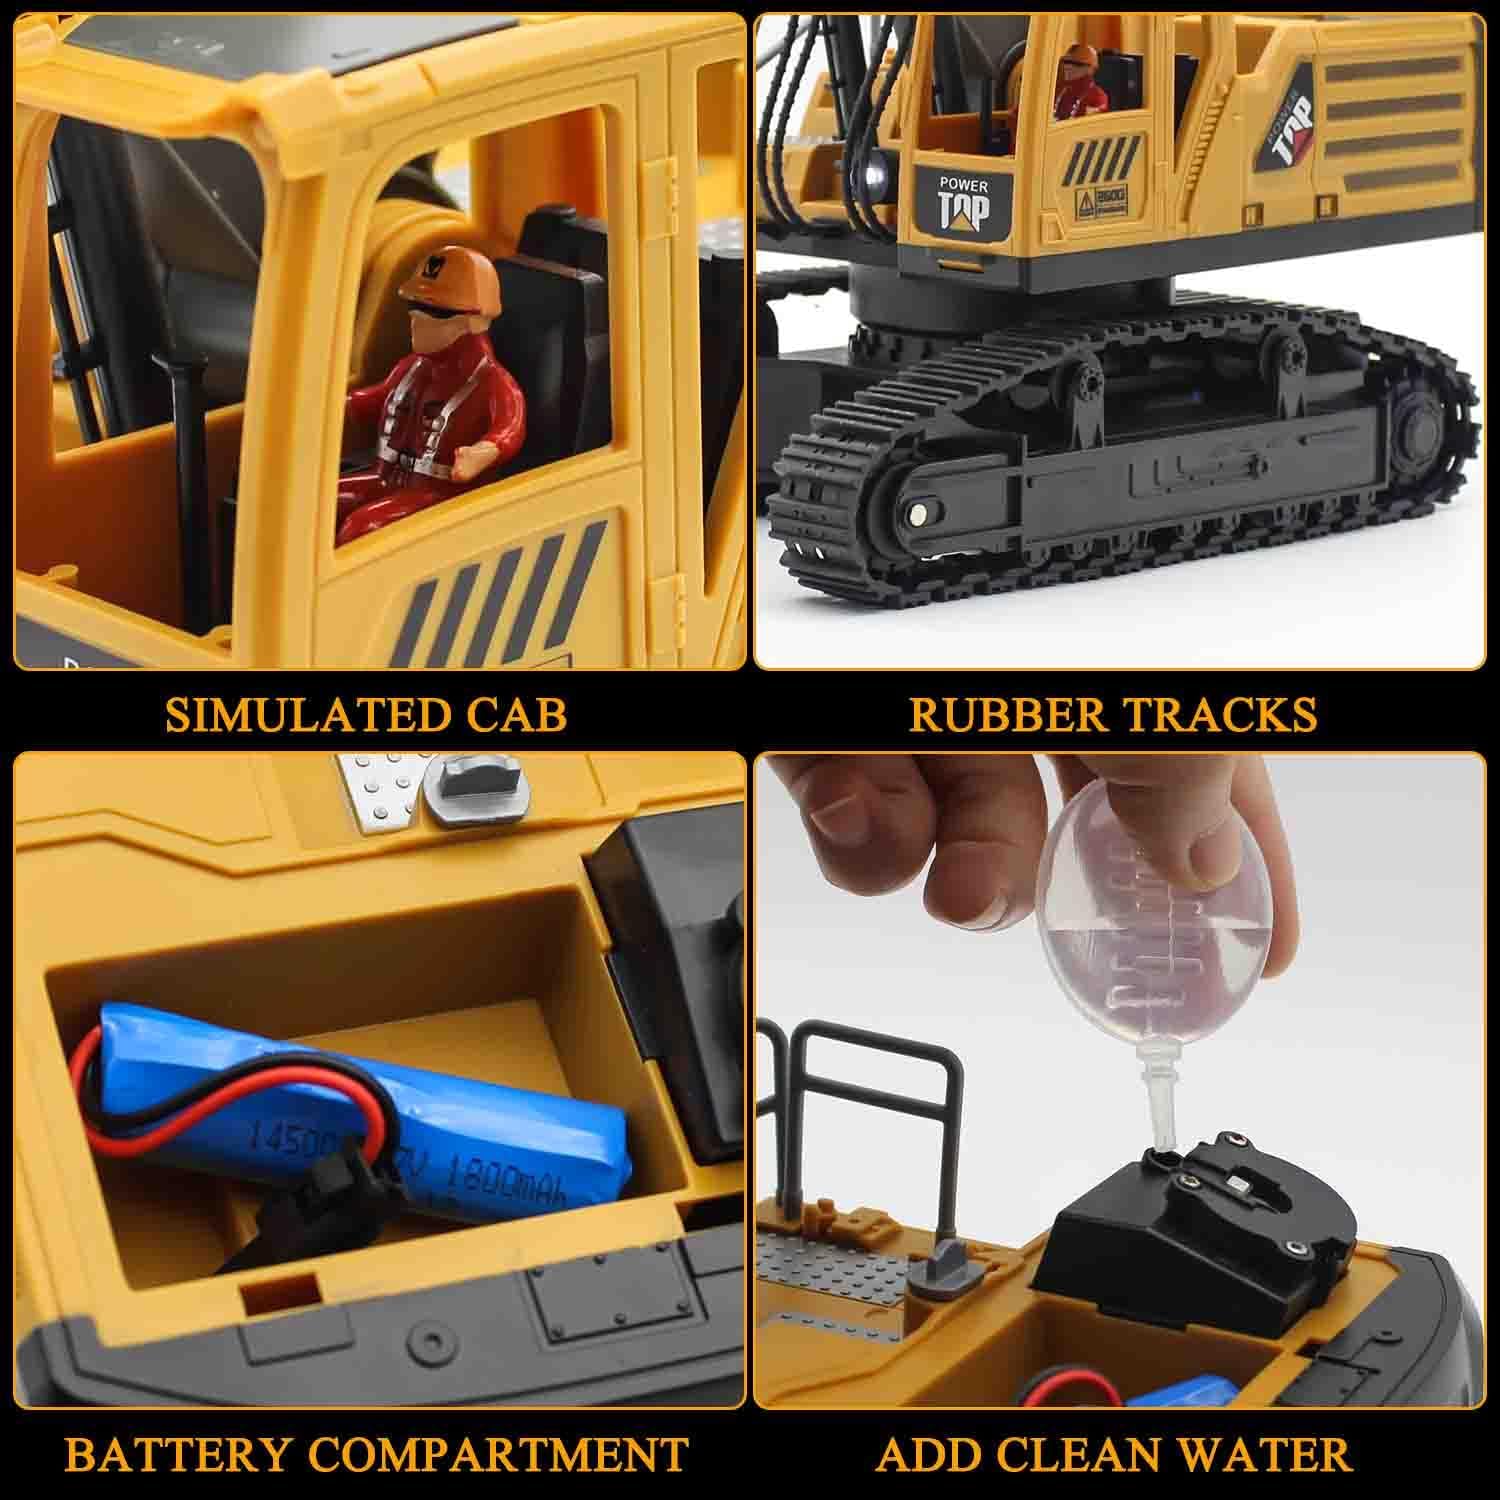 Revolutionizing Playtime: The Fistone 14 Channel Remote Control Excavator Toy Review